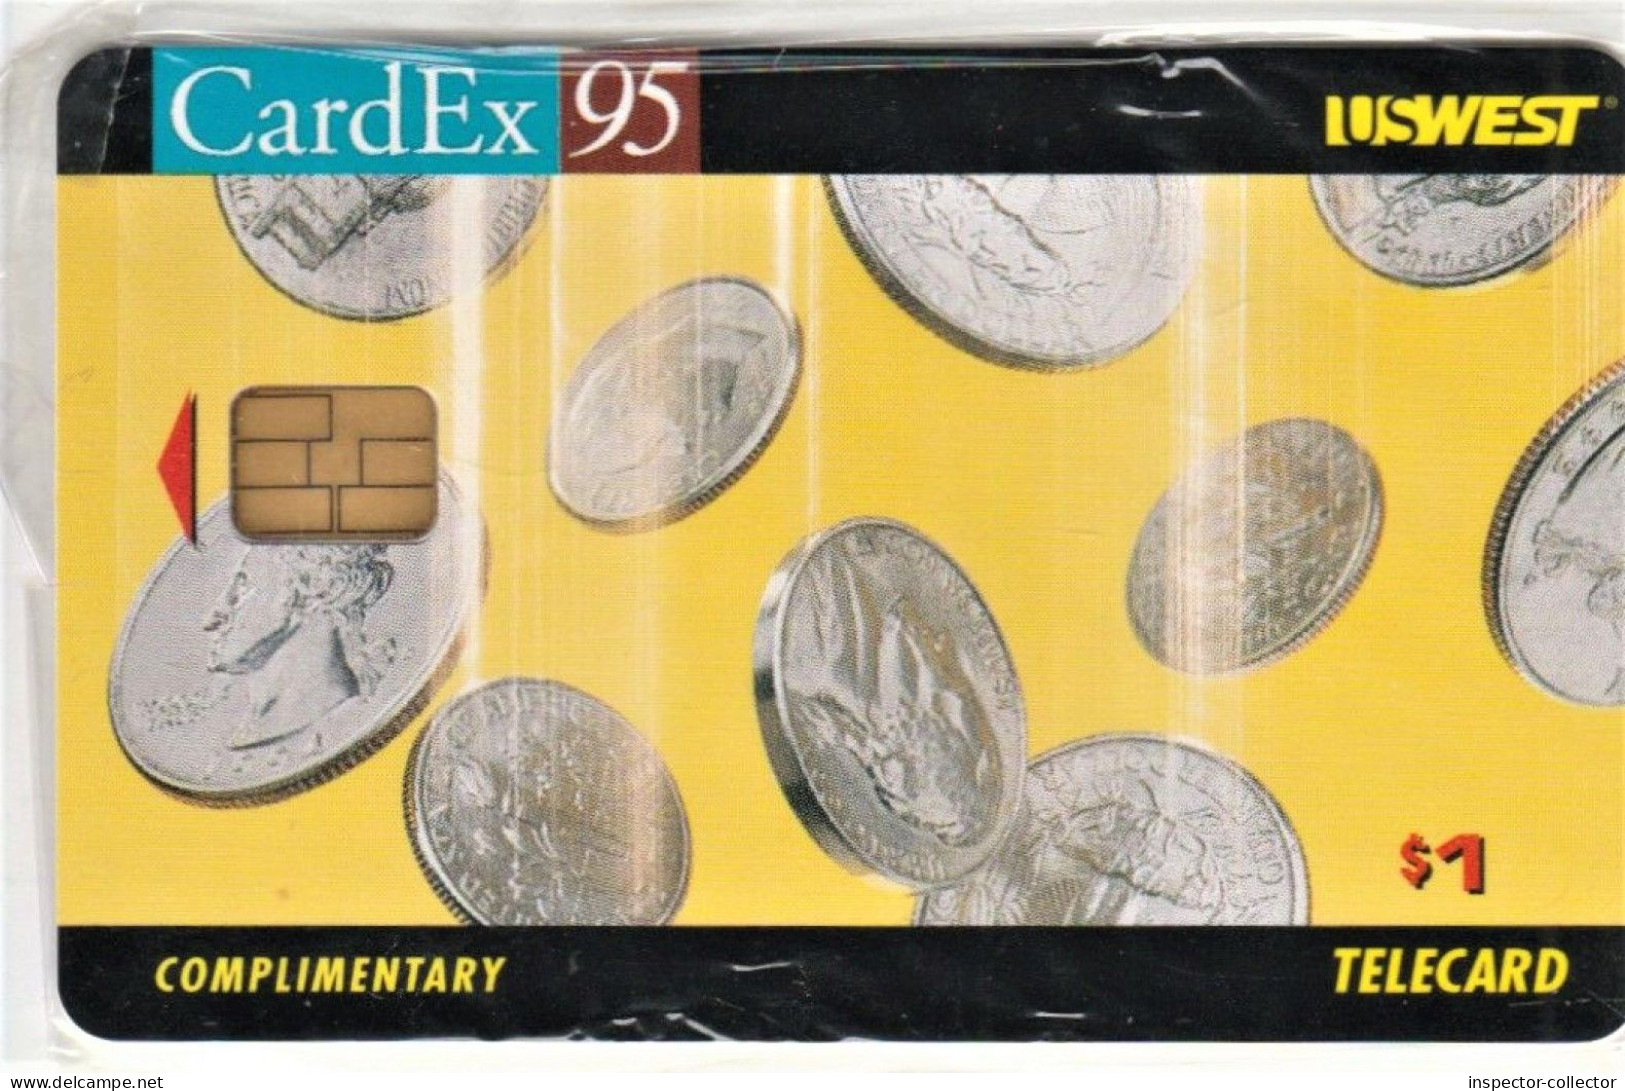 USA Mint Phonecard___CARDEX Coins___US West $1 Complimentary - [2] Chip Cards